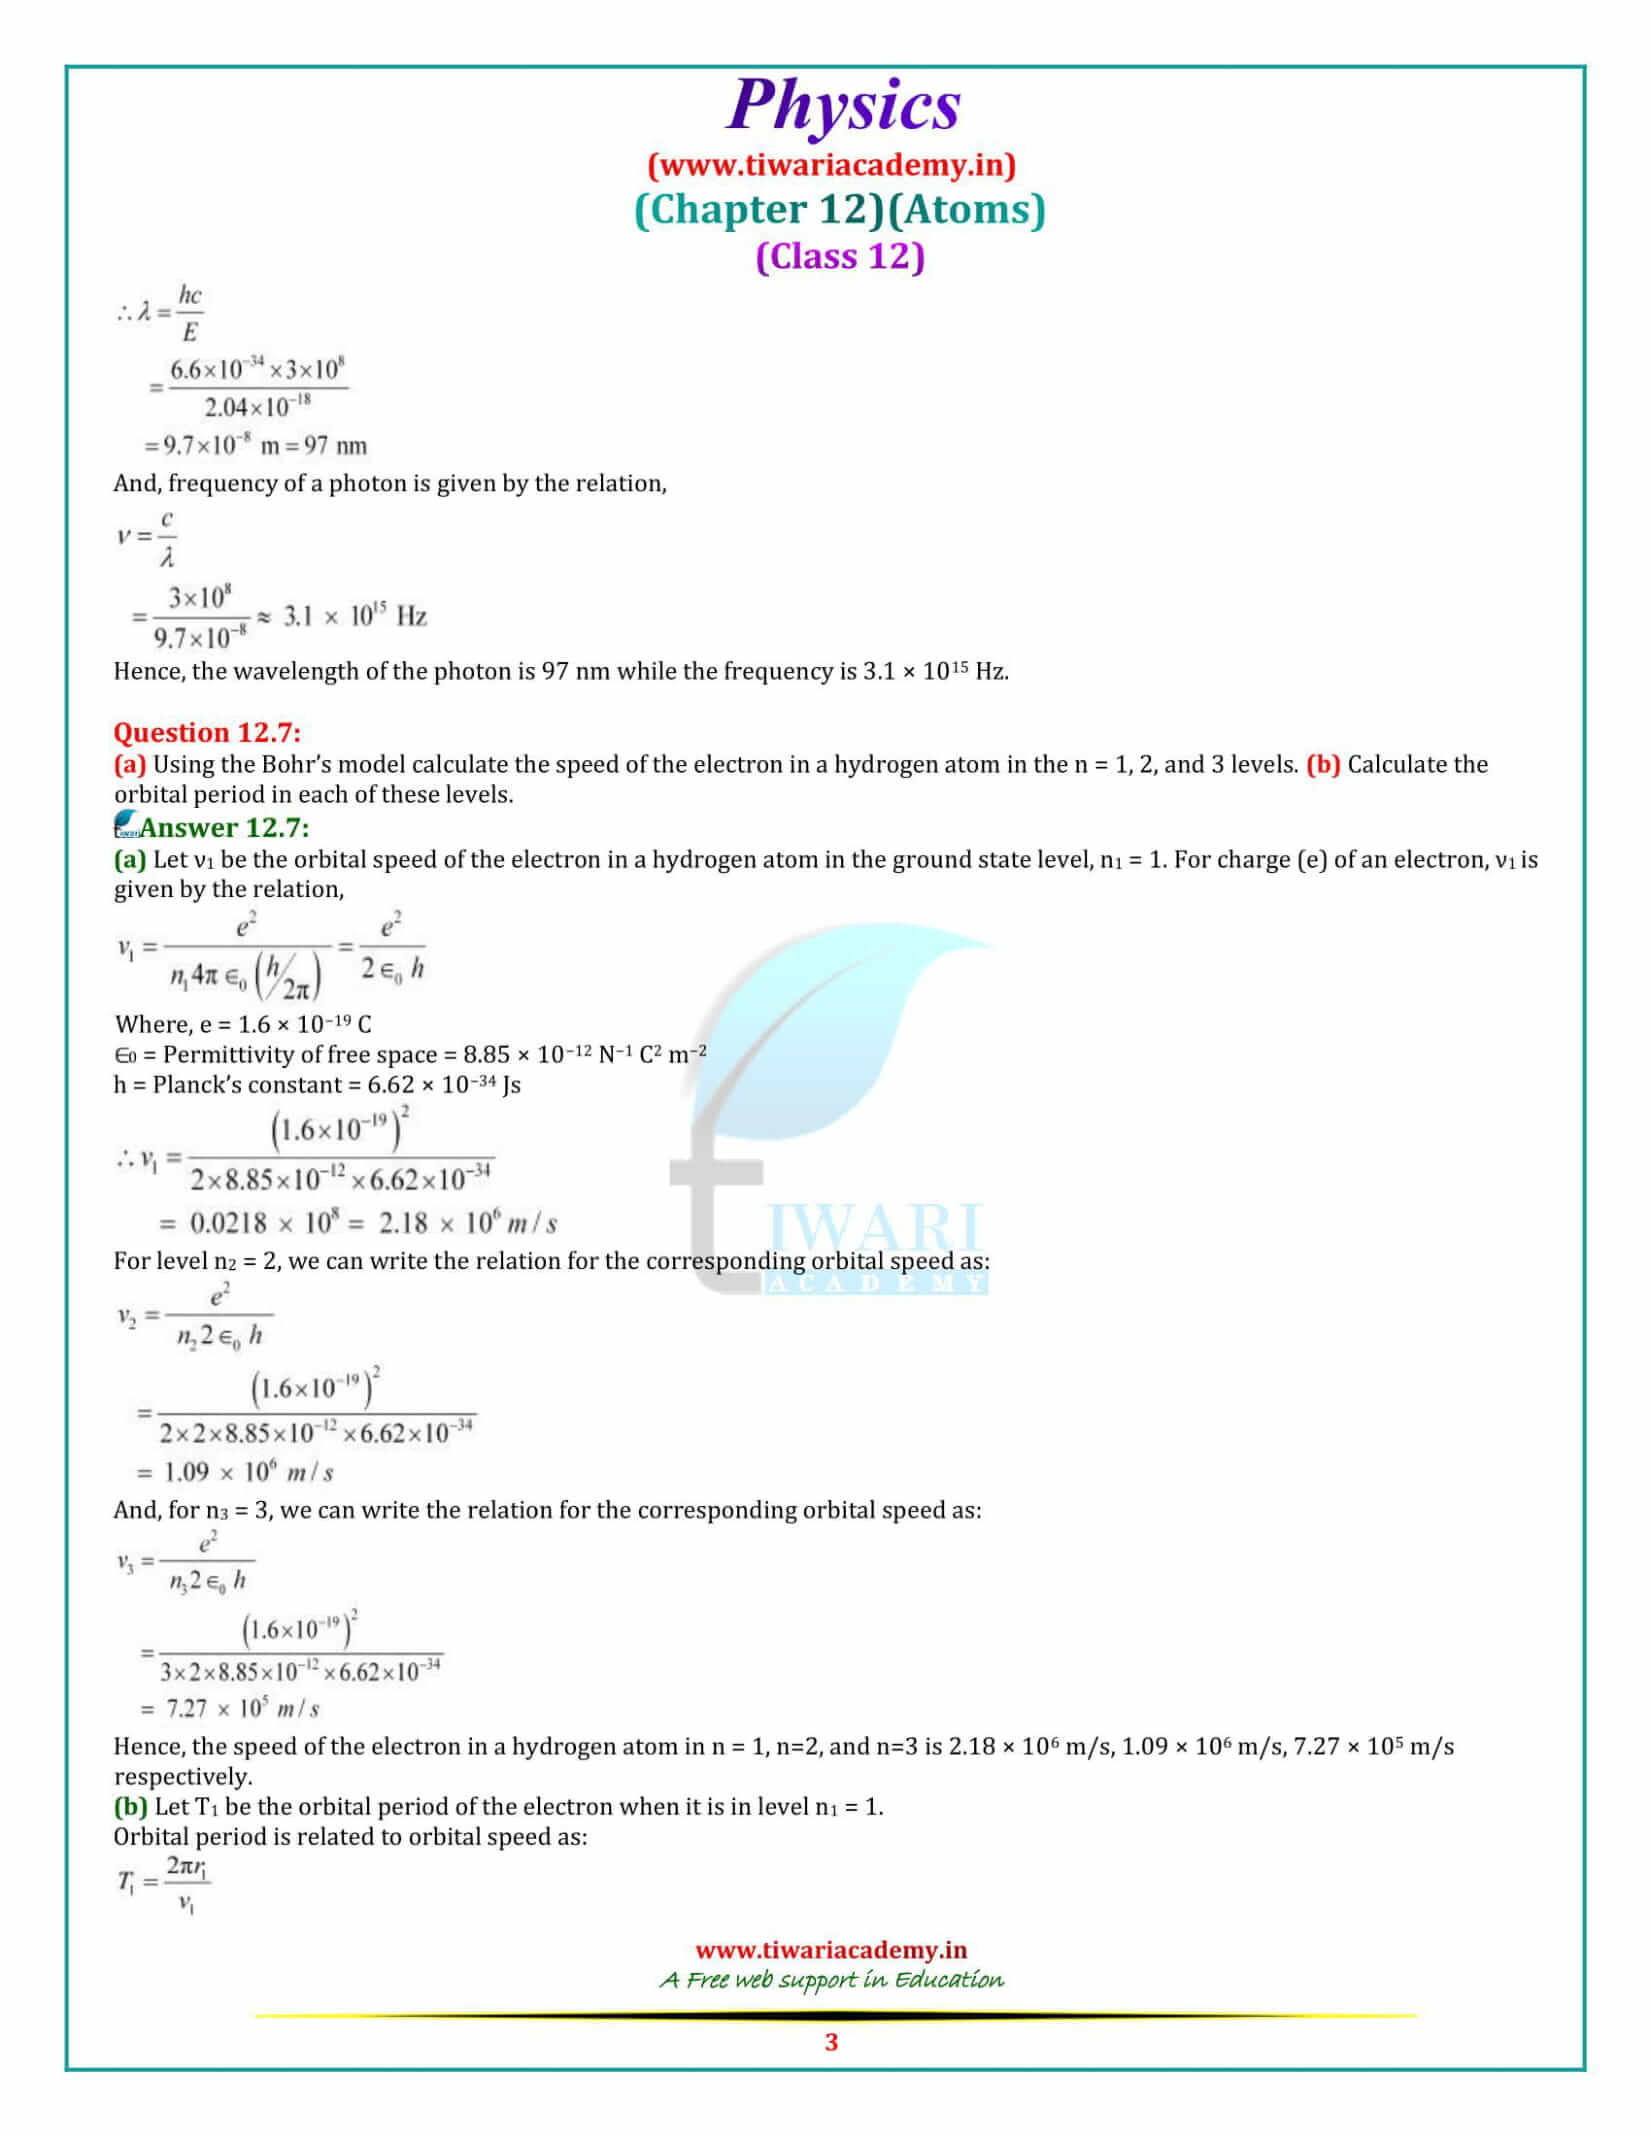 NCERT Solutions for Class 12 Physics Chapter 12 Atom free download